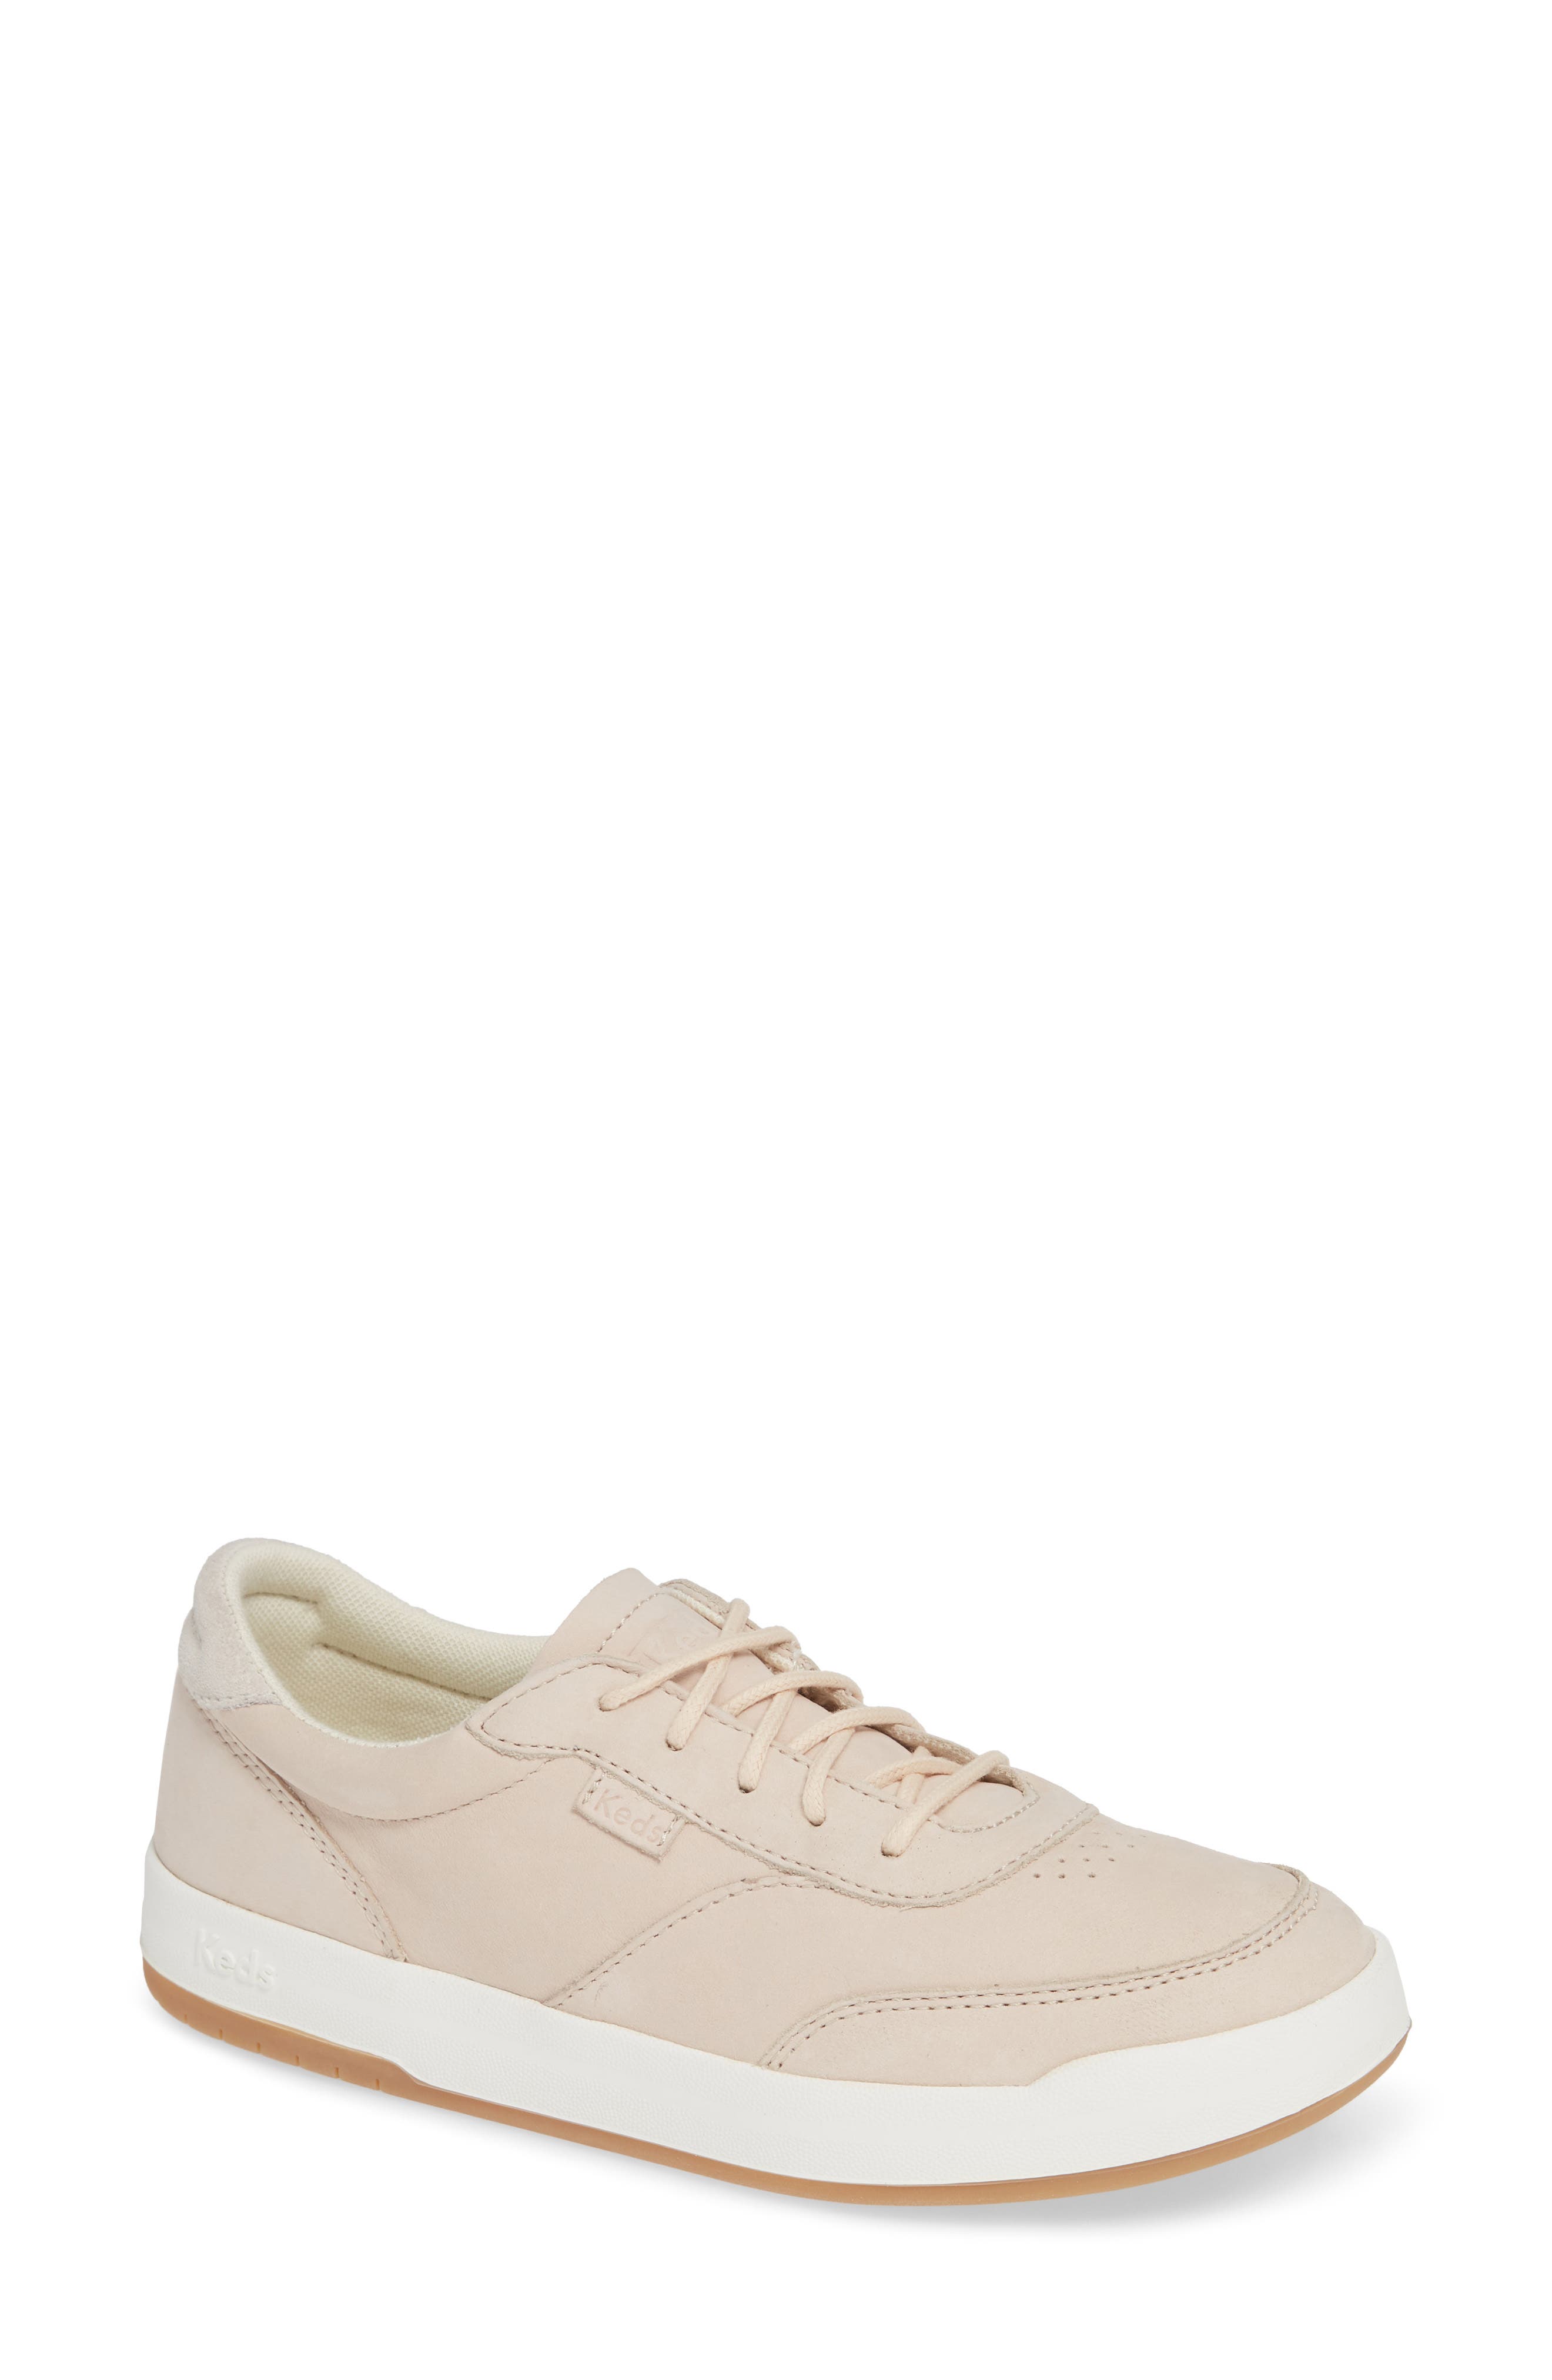 keds matchpoint sneakers